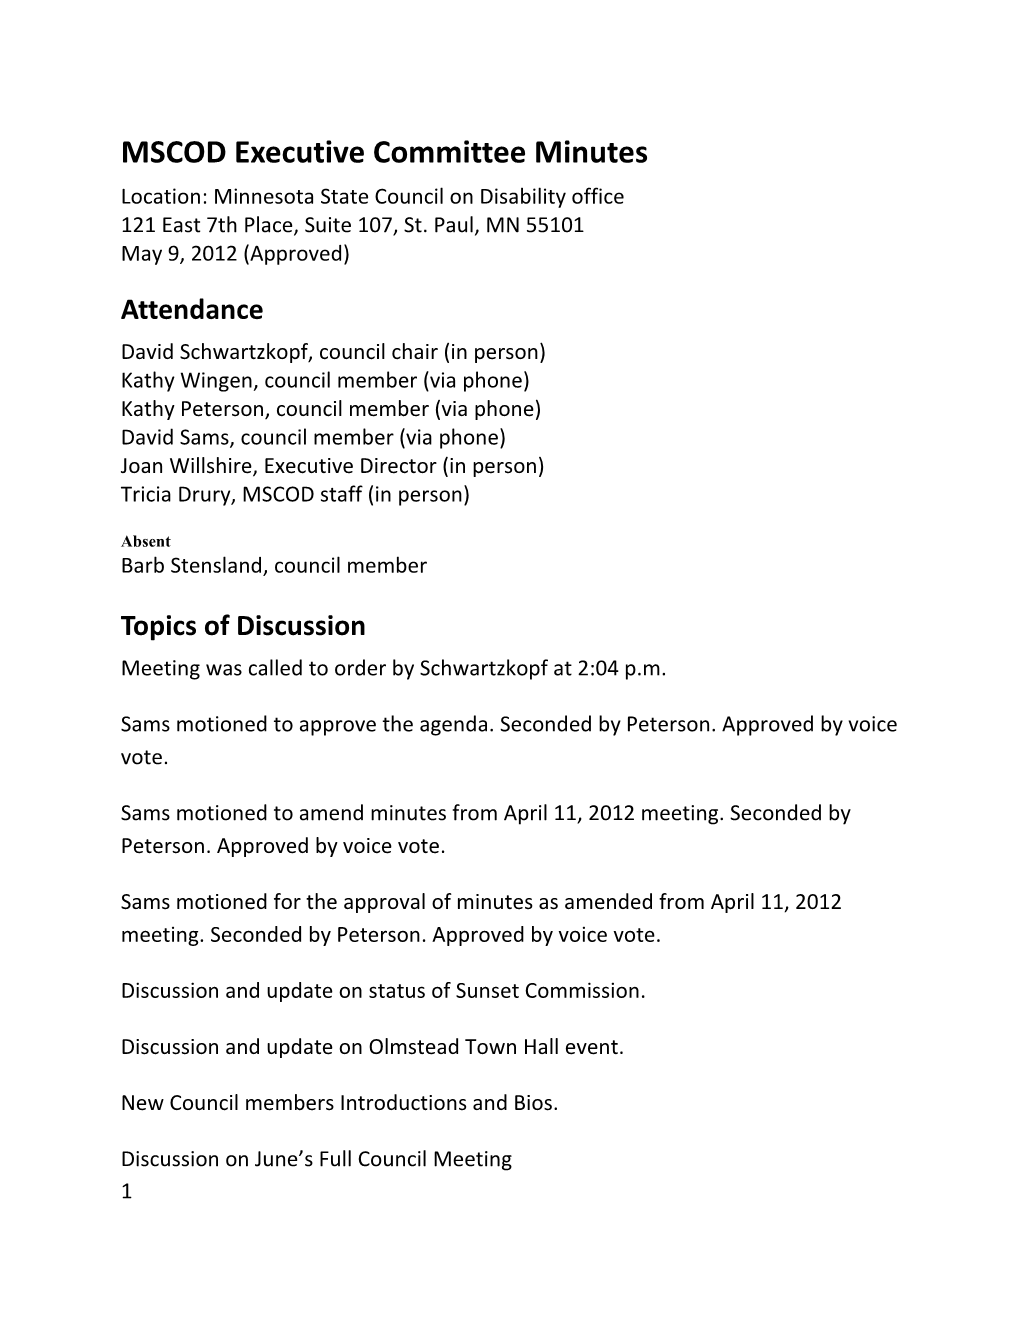 MSCOD Executive Committee Meeting Minutes, 05/09/2012